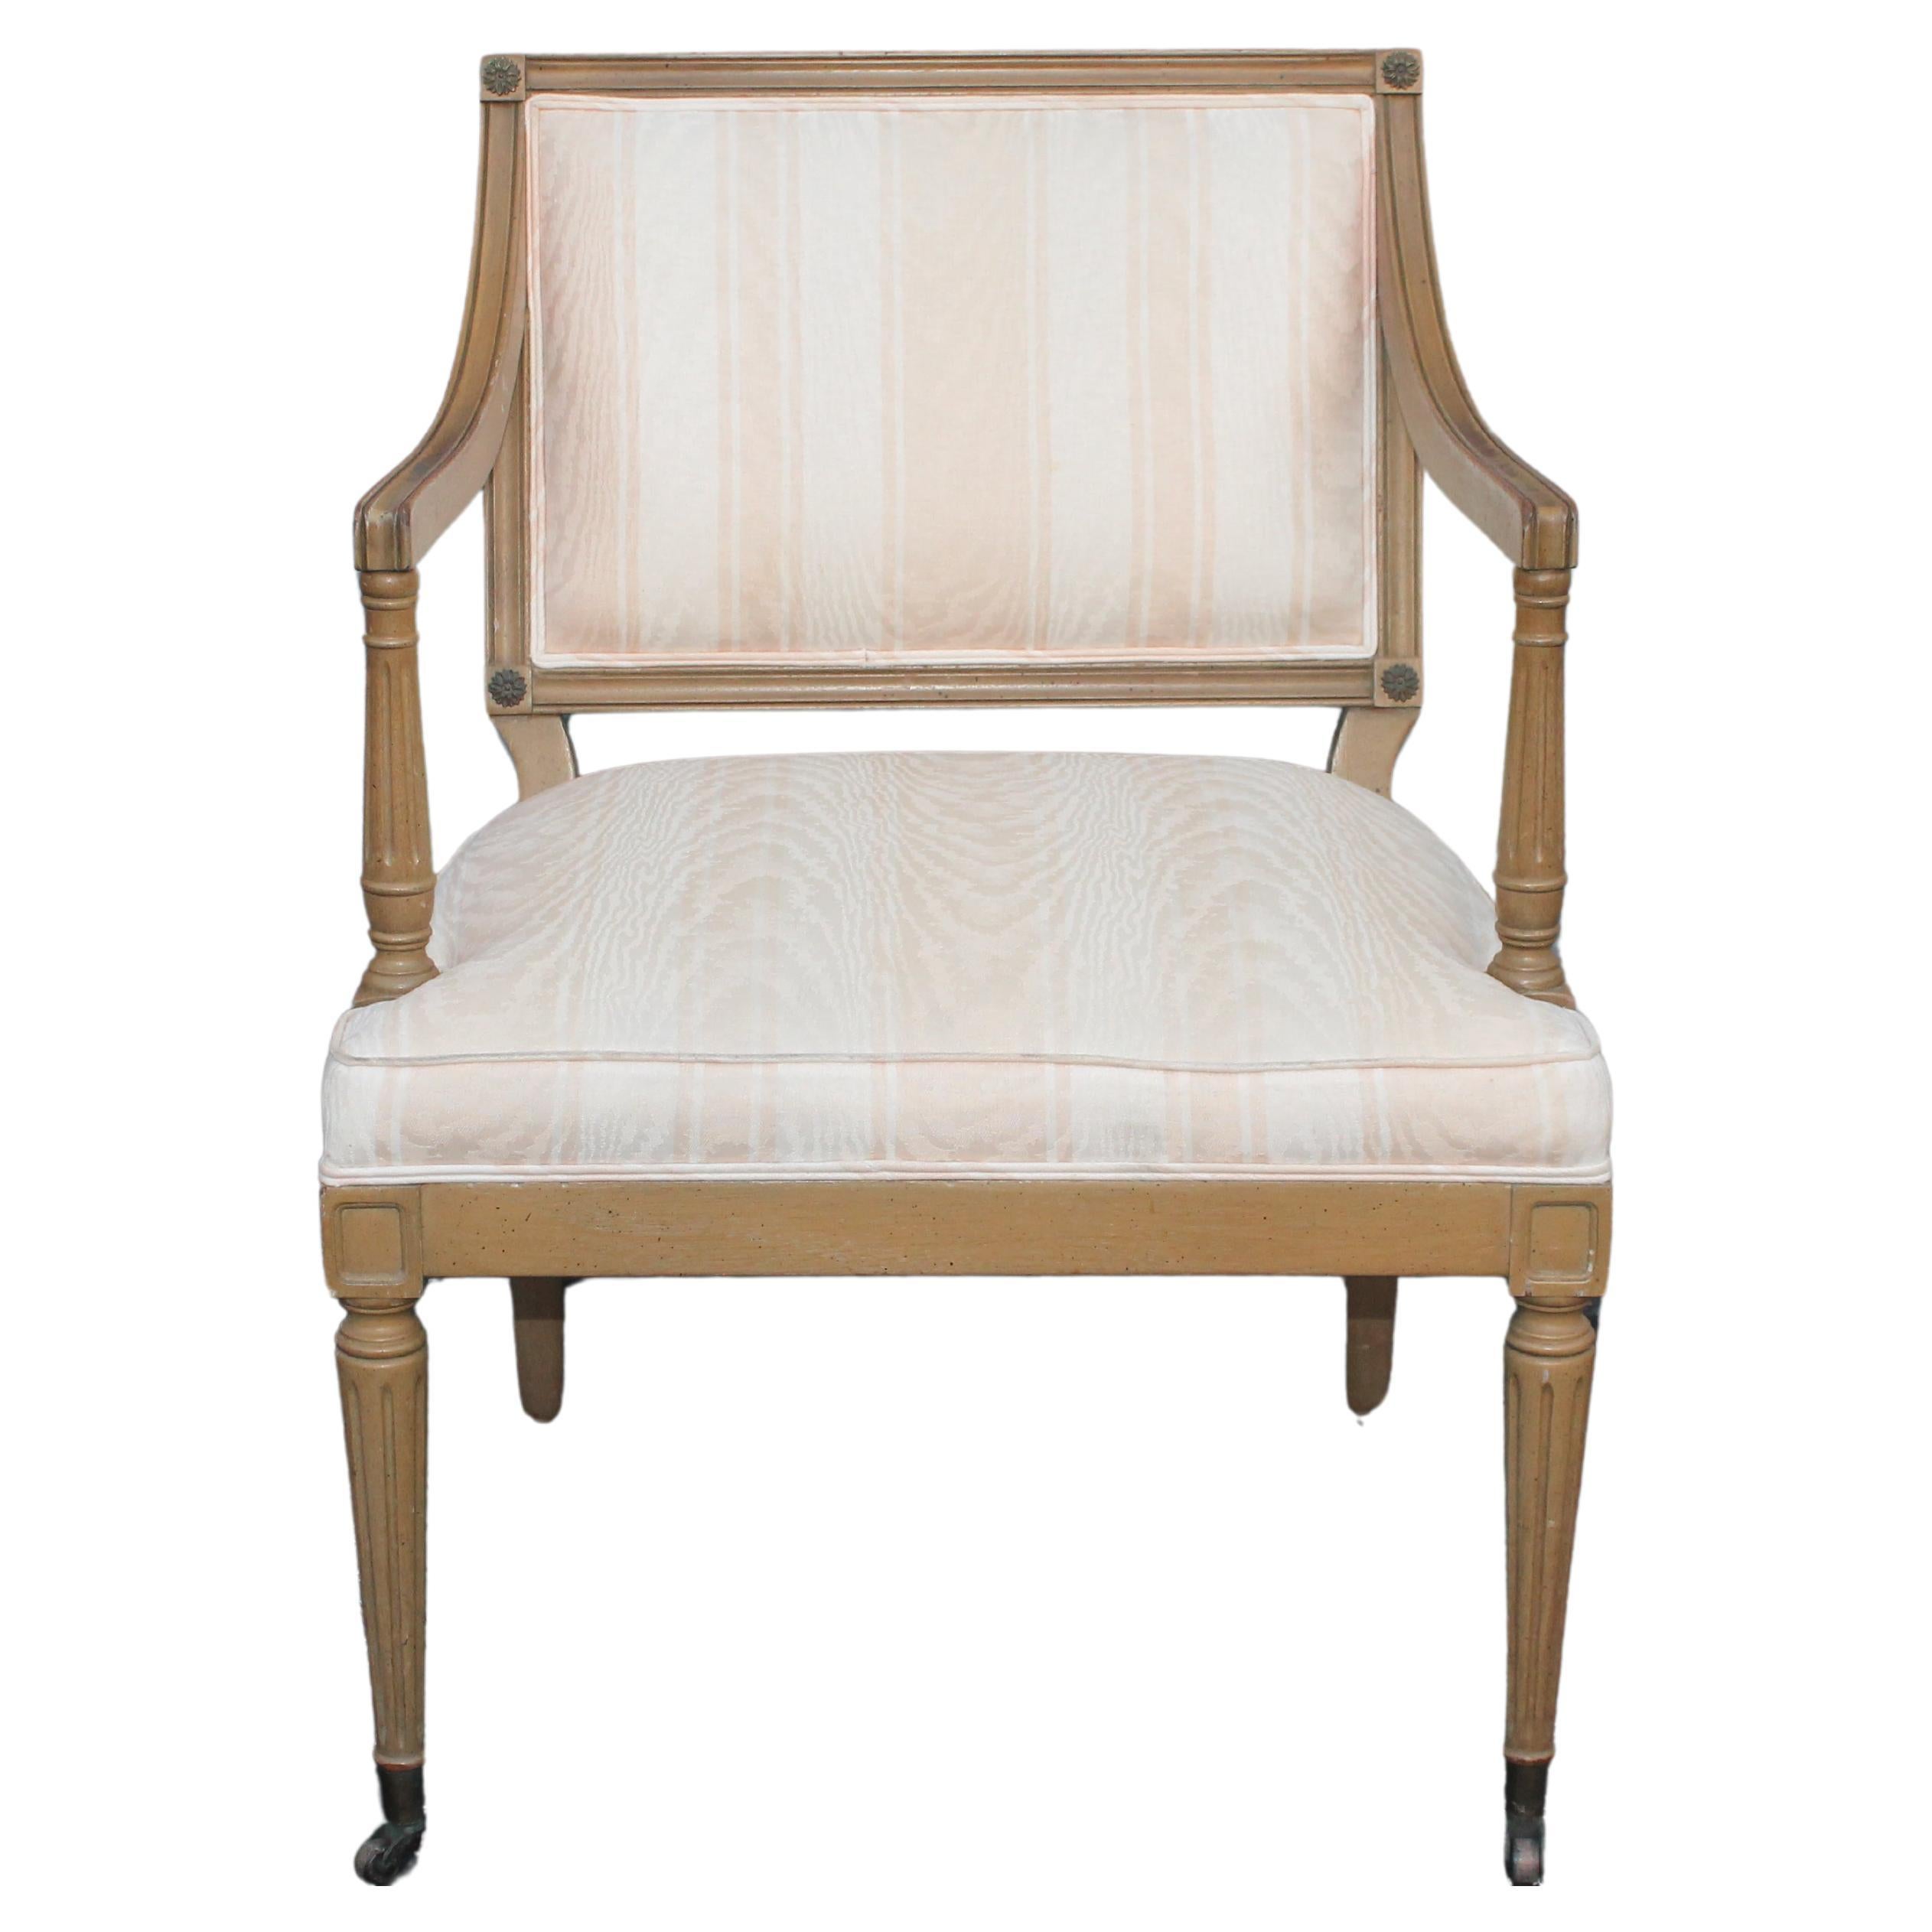 1970's Neoclassical style Occasional/ Accent/ Side Chair By John Widdicomb